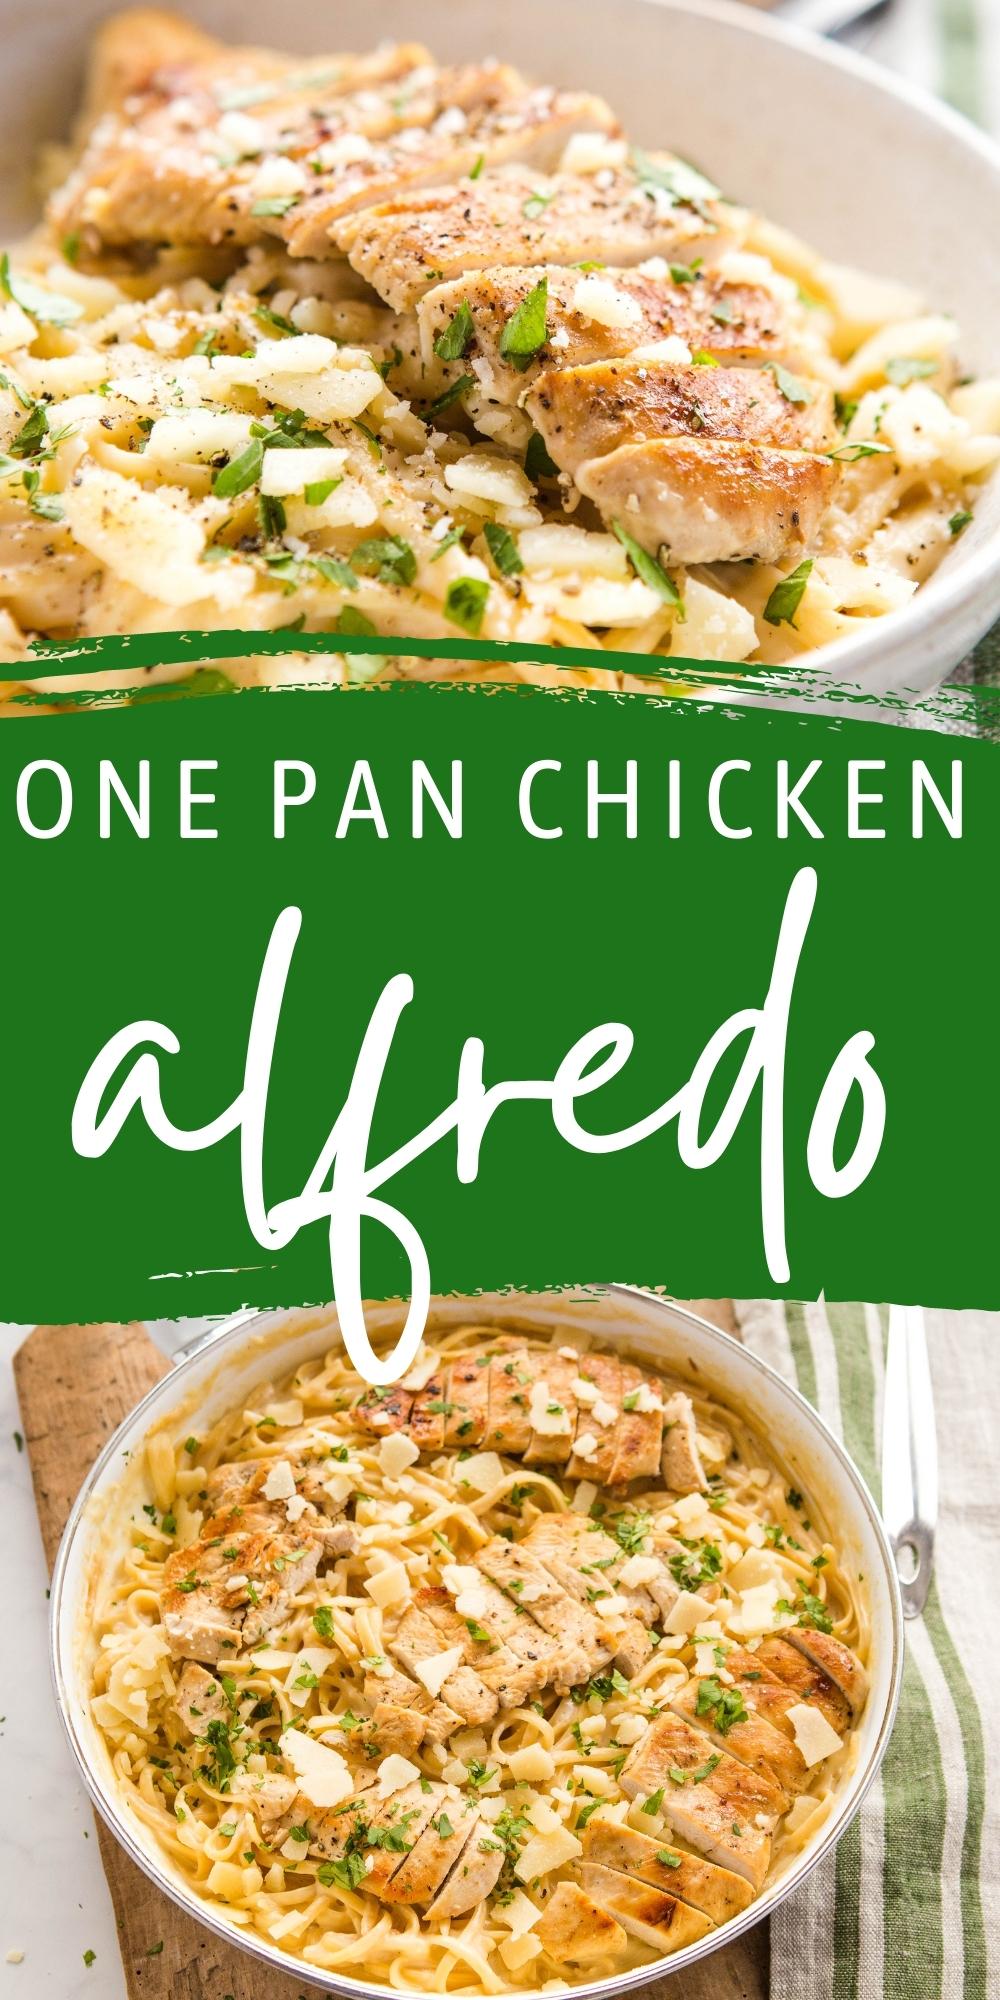 This One Pan Chicken Alfredo Pasta is a delicious and easy weeknight meal with chicken breast, fettuccine, and the easiest Alfredo sauce ever! Recipe from thebusybaker.ca! #fettuccinealfredo #chickenalfredo #pasta #easymeal #onepan #onepotpasta via @busybakerblog